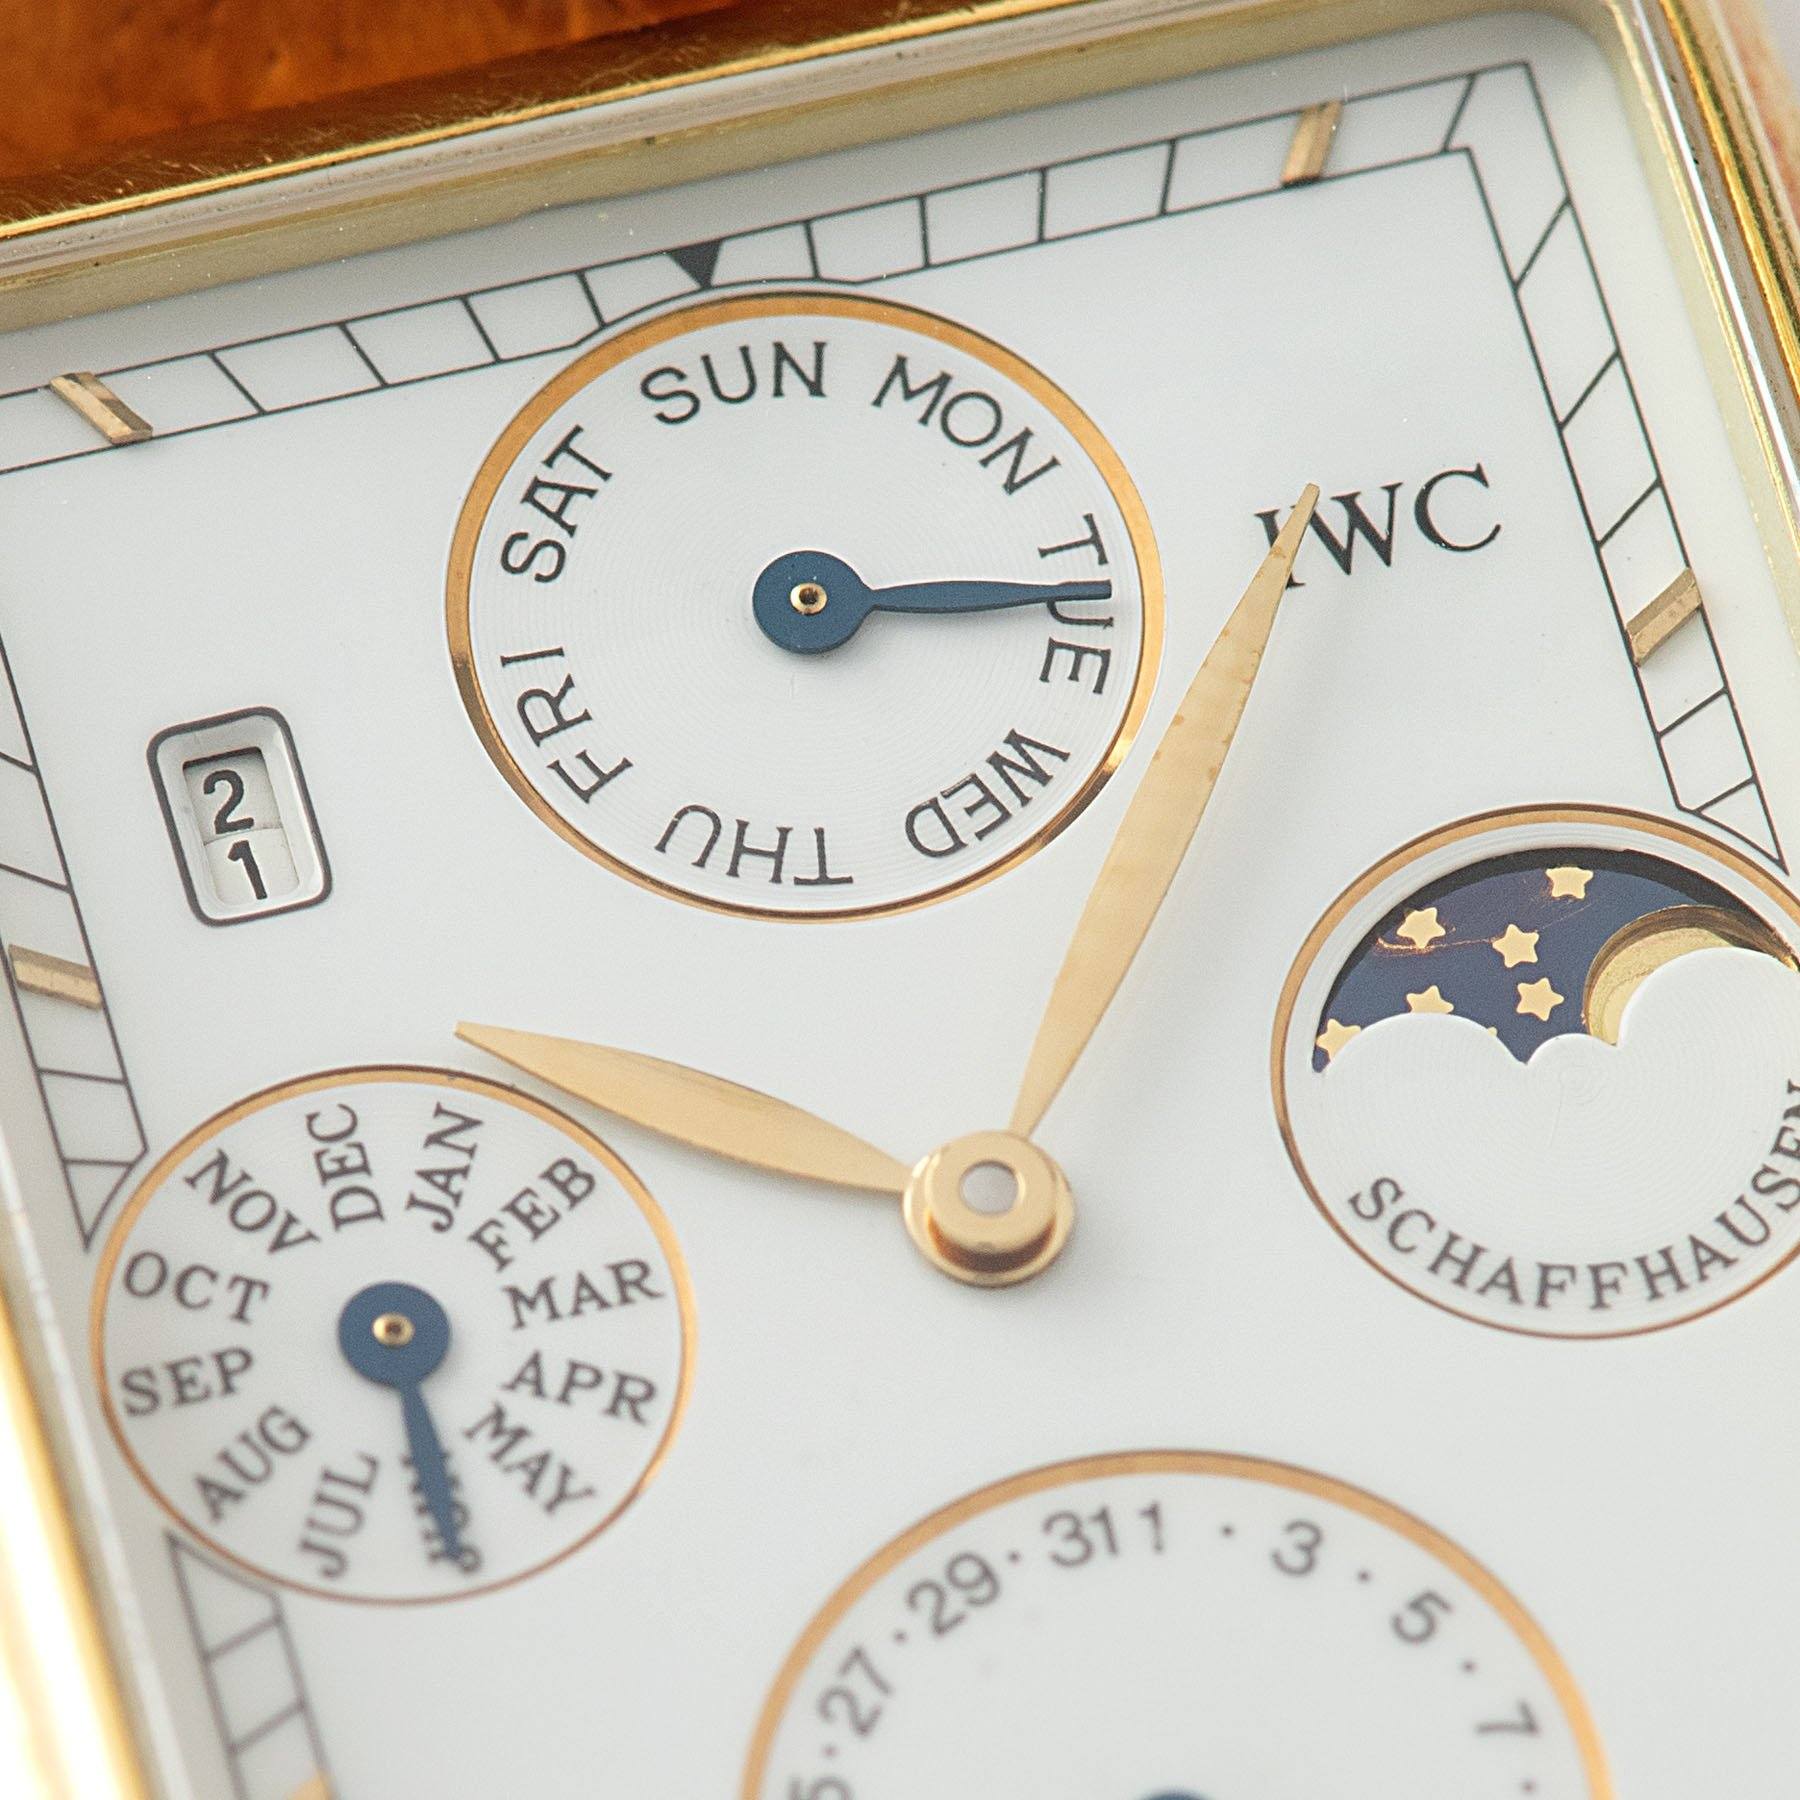 IWC Novecento Perpetual Calendar Yellow Gold Reference 3545